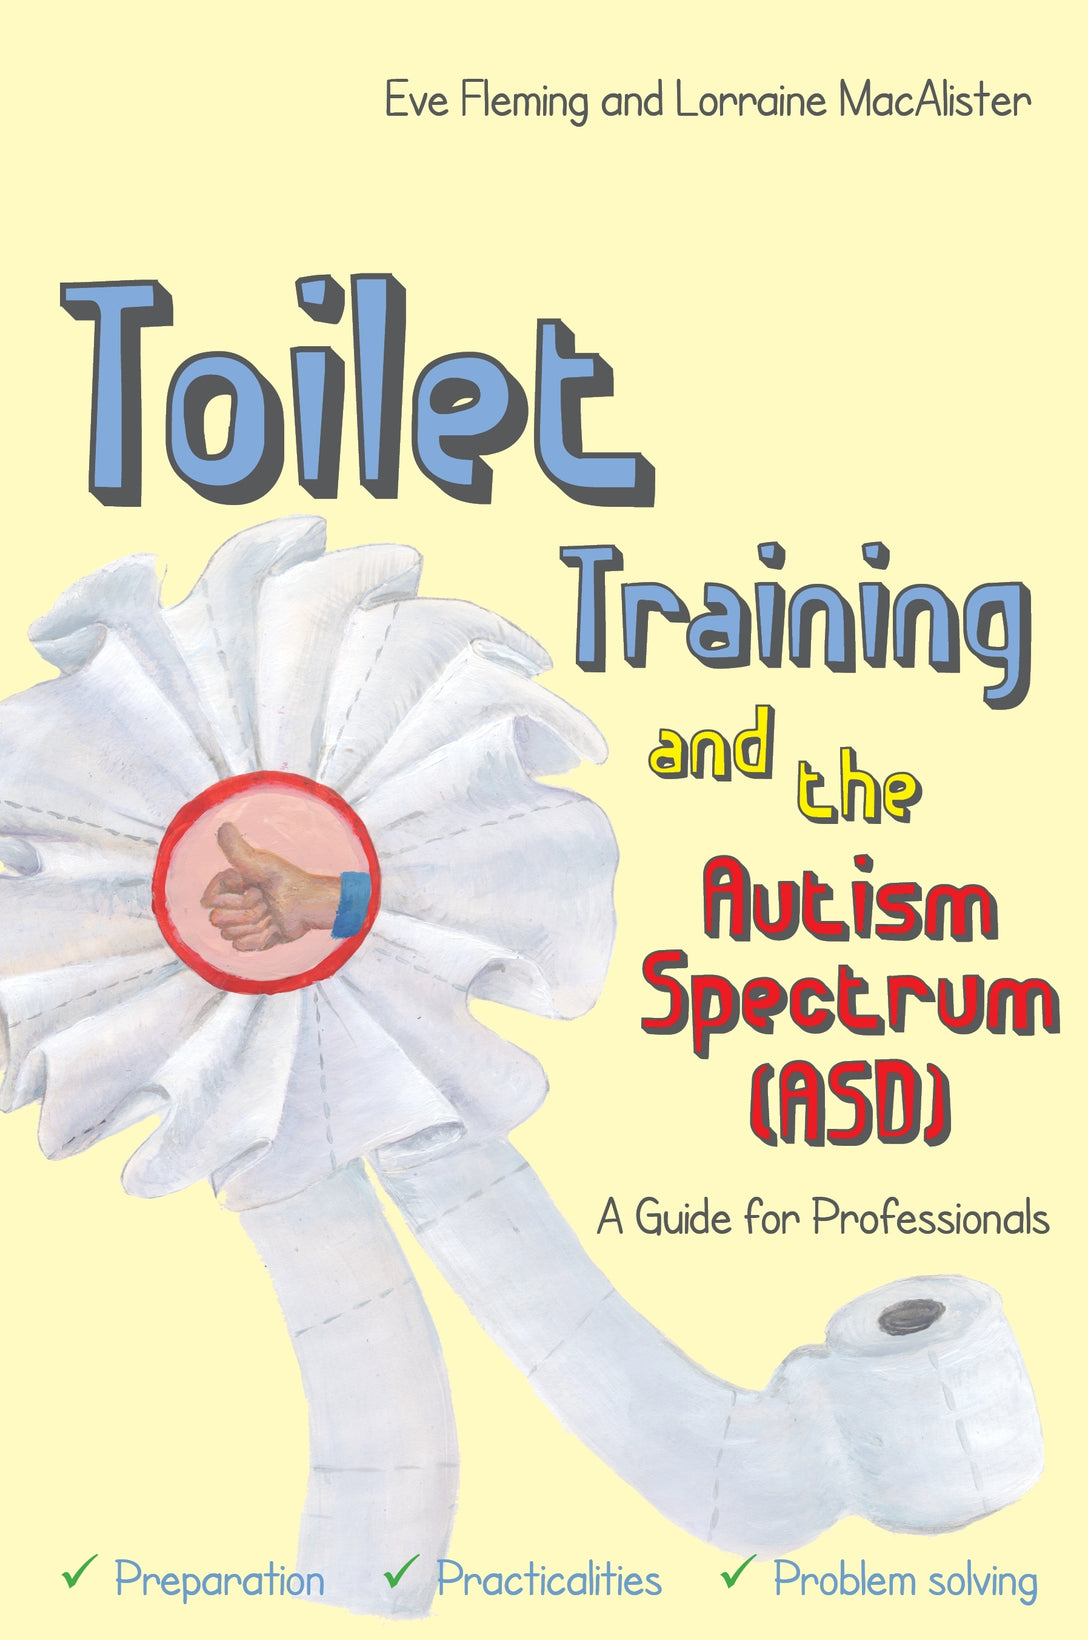 Toilet Training and the Autism Spectrum (ASD) by Penny Dobson, Lorraine MacAlister, Eve Fleming